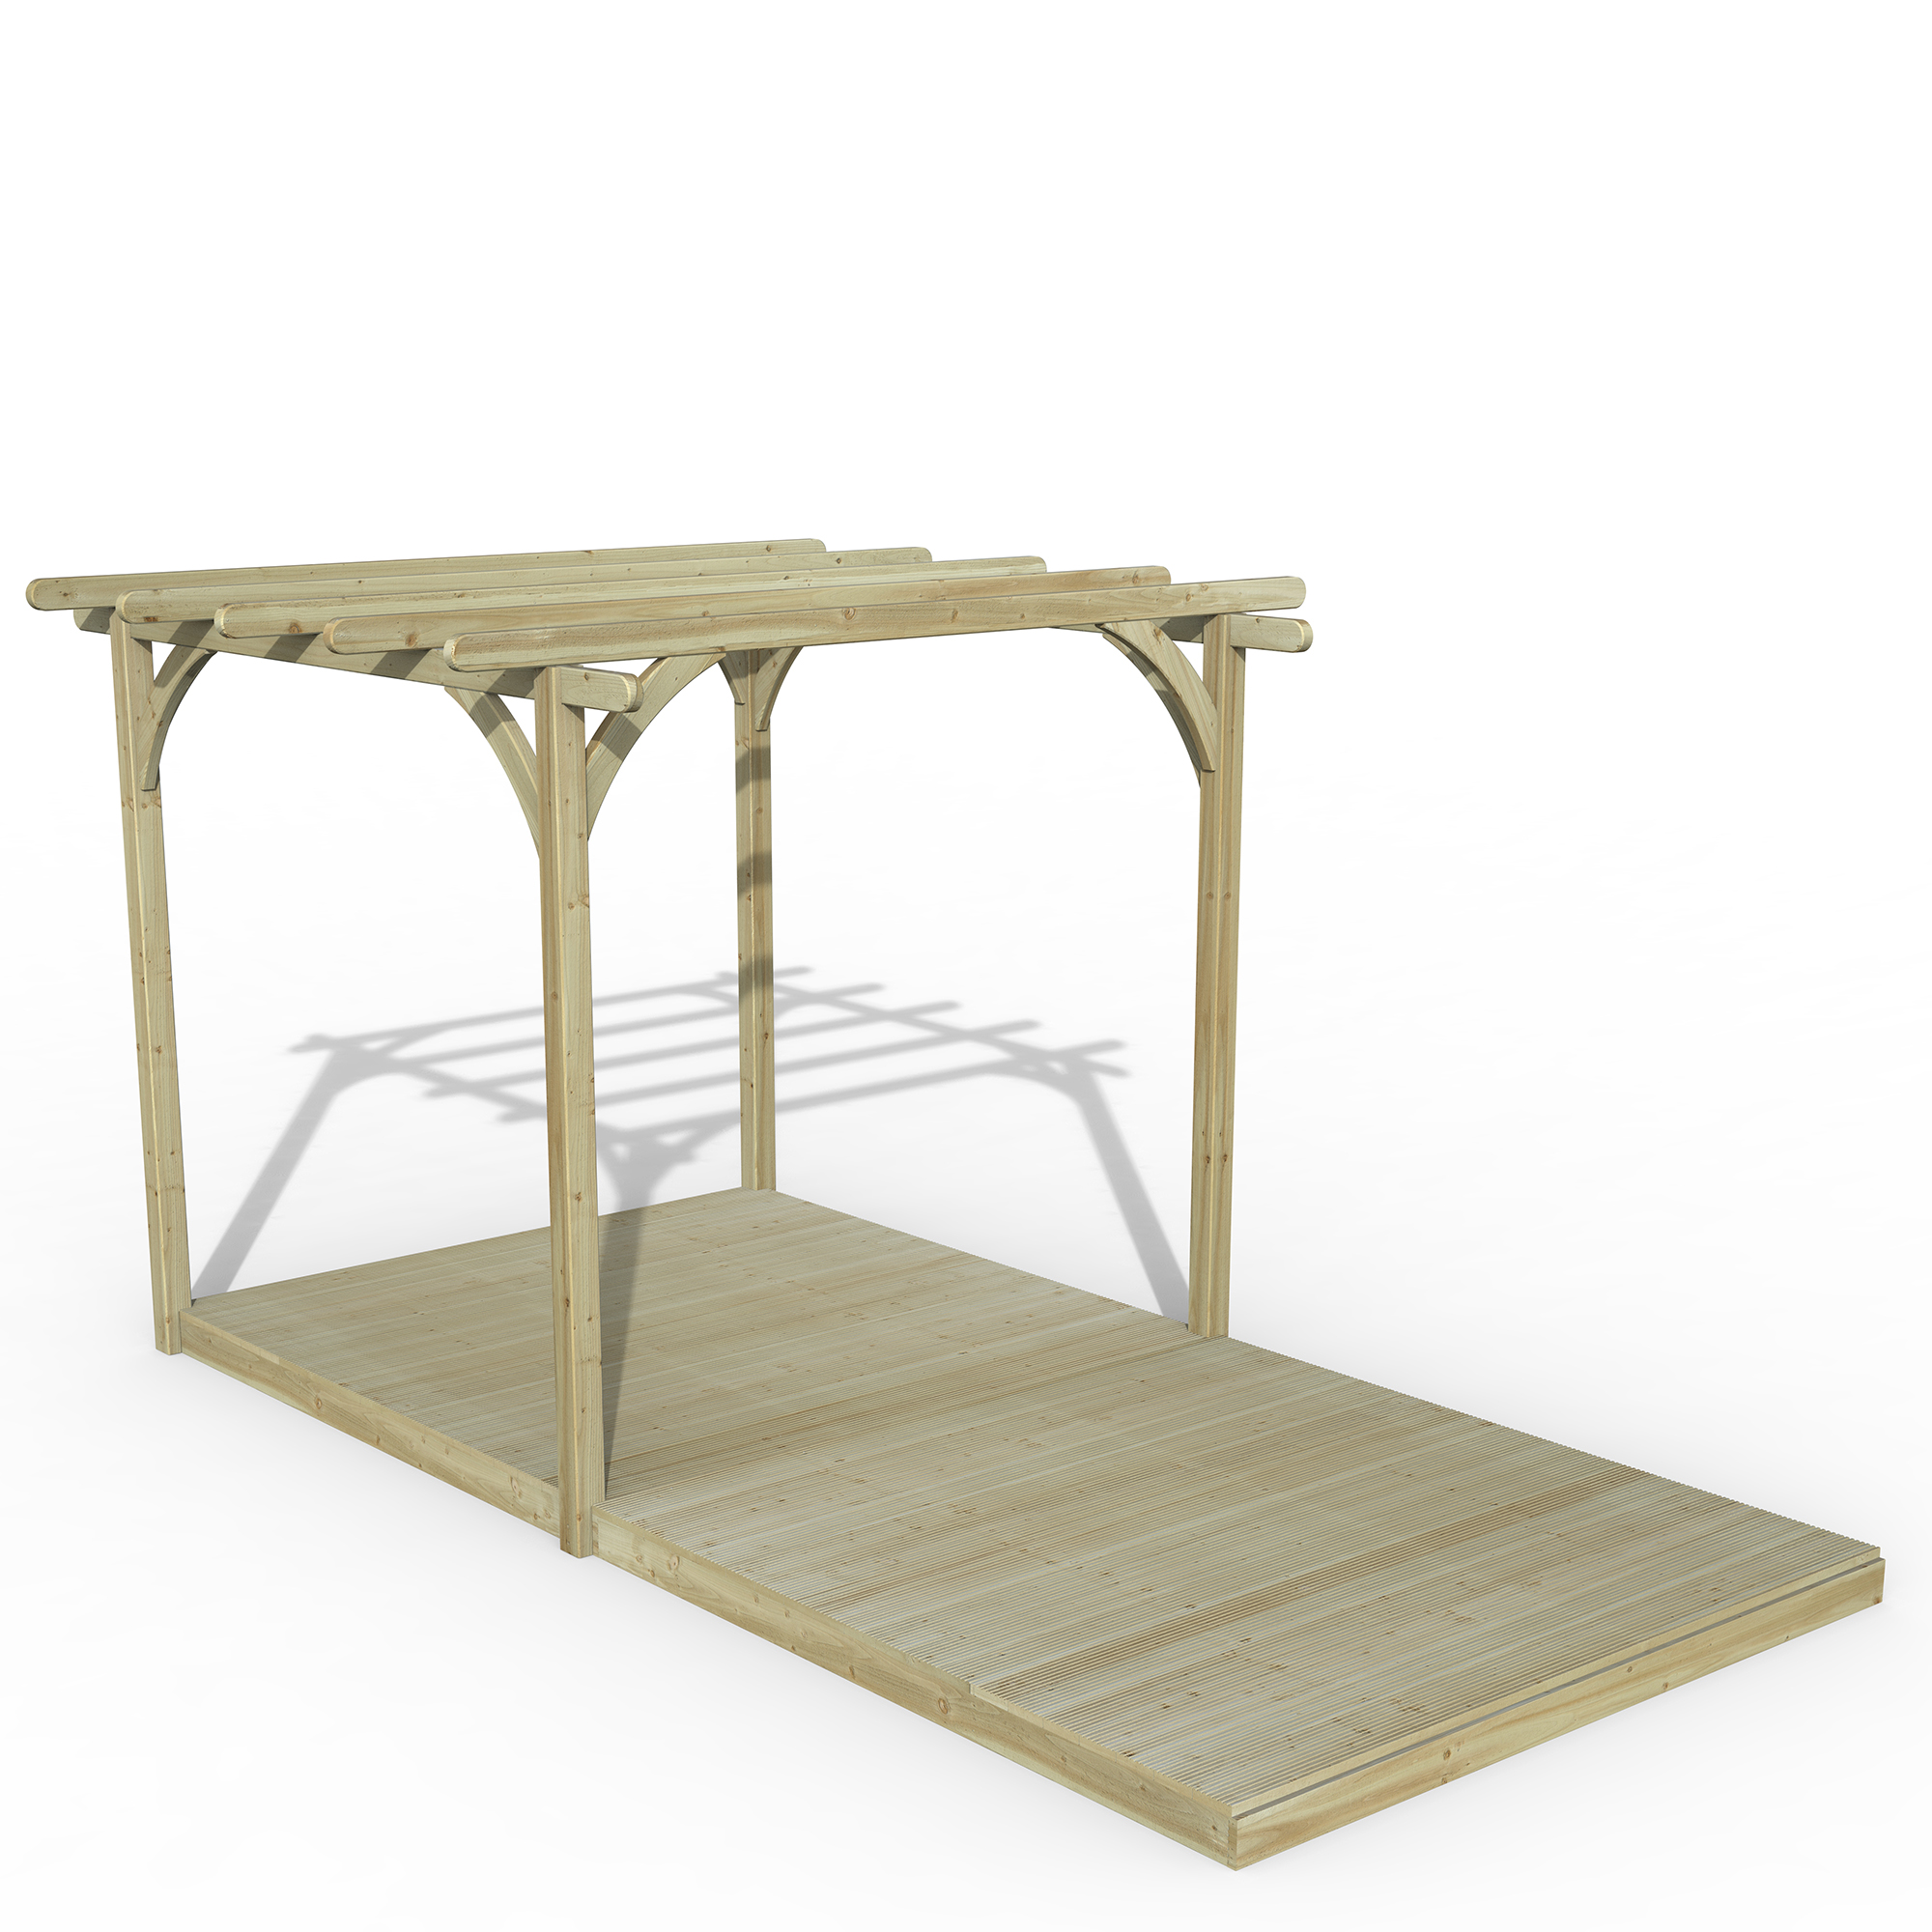 Forest Garden 2.4 x 4.8m Ultima Pergola and Decking Kit